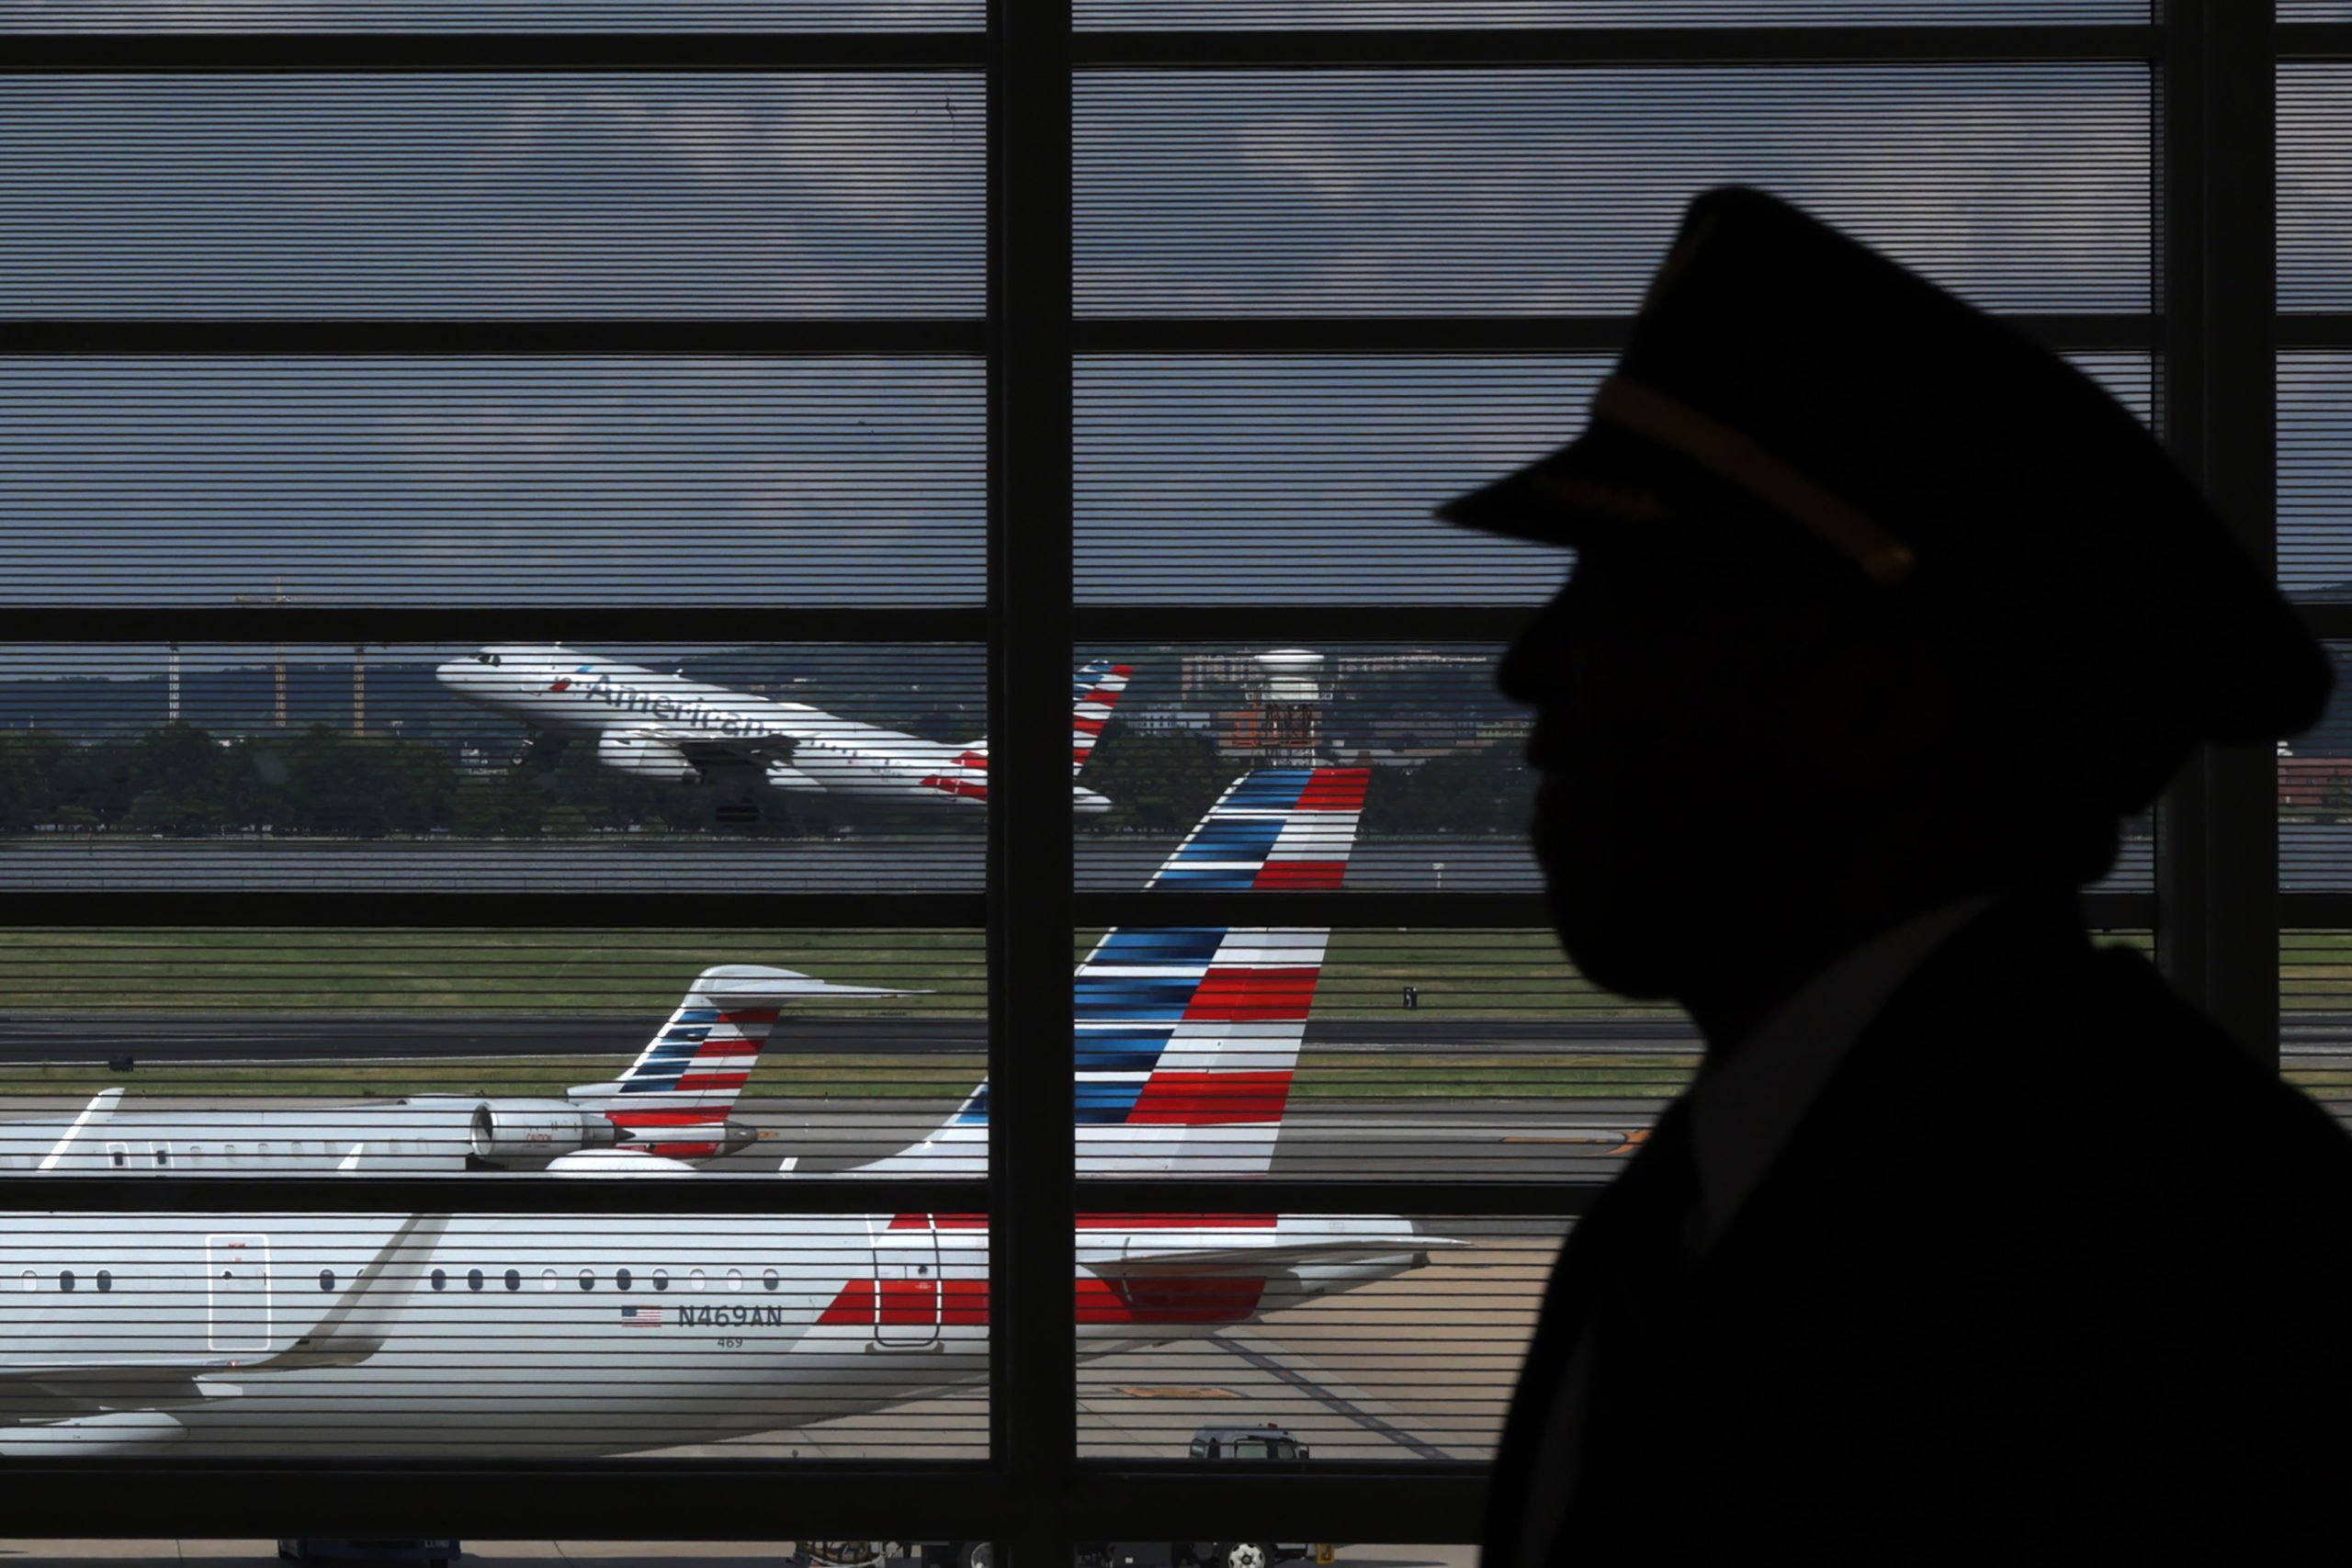 WASHINGTON, DC - JULY 10: An American Airlines flight takes off from Ronald Reagan Washington National Airport on July 10, 2023 in Washington, DC. Senate Democrats from the Washington, D.C., region held a news conference "to call on Congress not to meddle with the safety and operations" of Ronald Reagan Washington National Airport, "by making changes to the slot and perimeter rules in the upcoming reauthorization of the Federal Aviation Administration (FAA)." (Photo by Alex Wong/Getty Images)